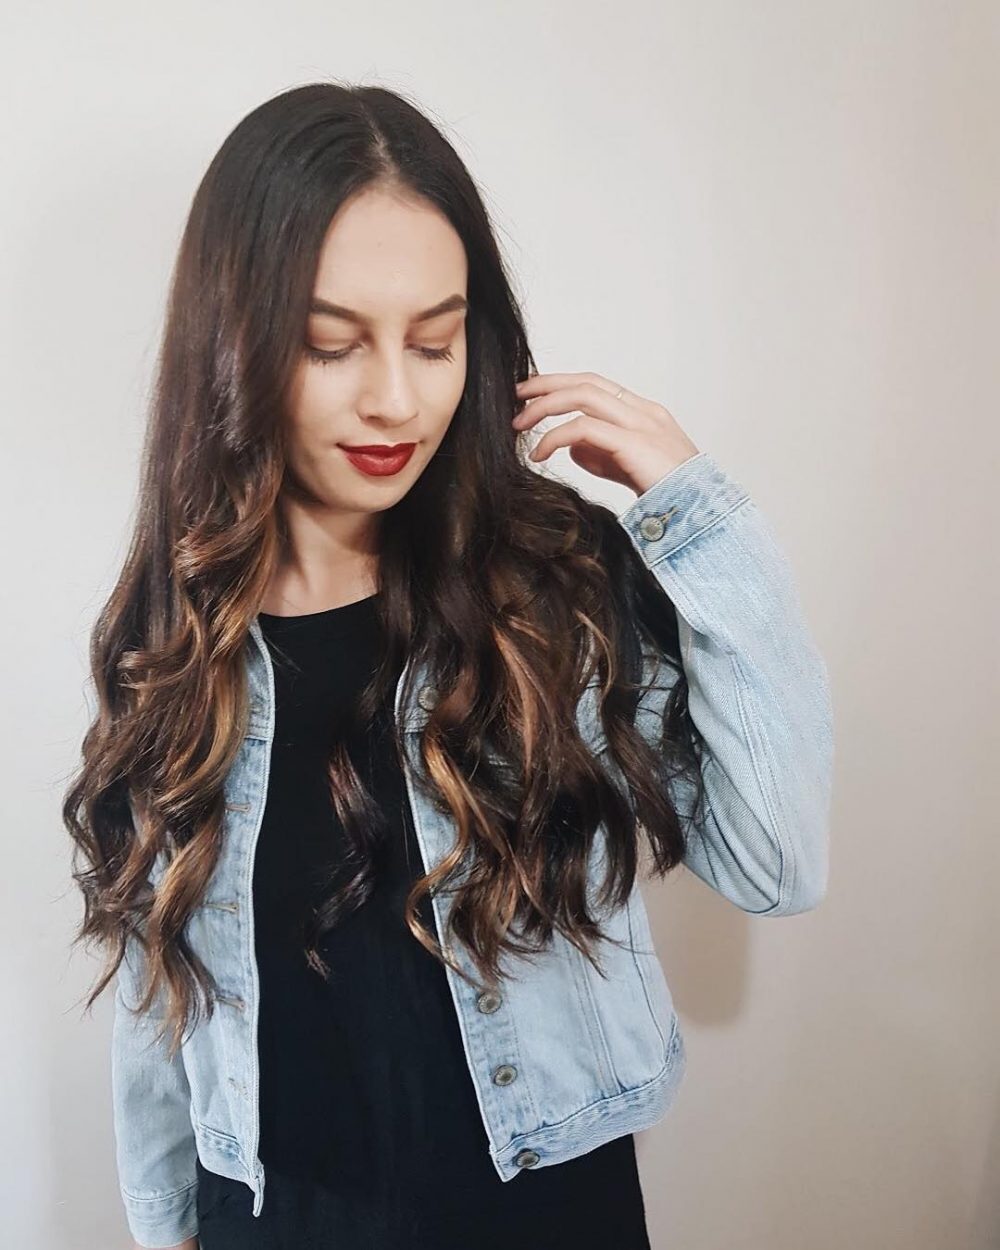 24 Long Wavy Hair Ideas That Trending Right Now